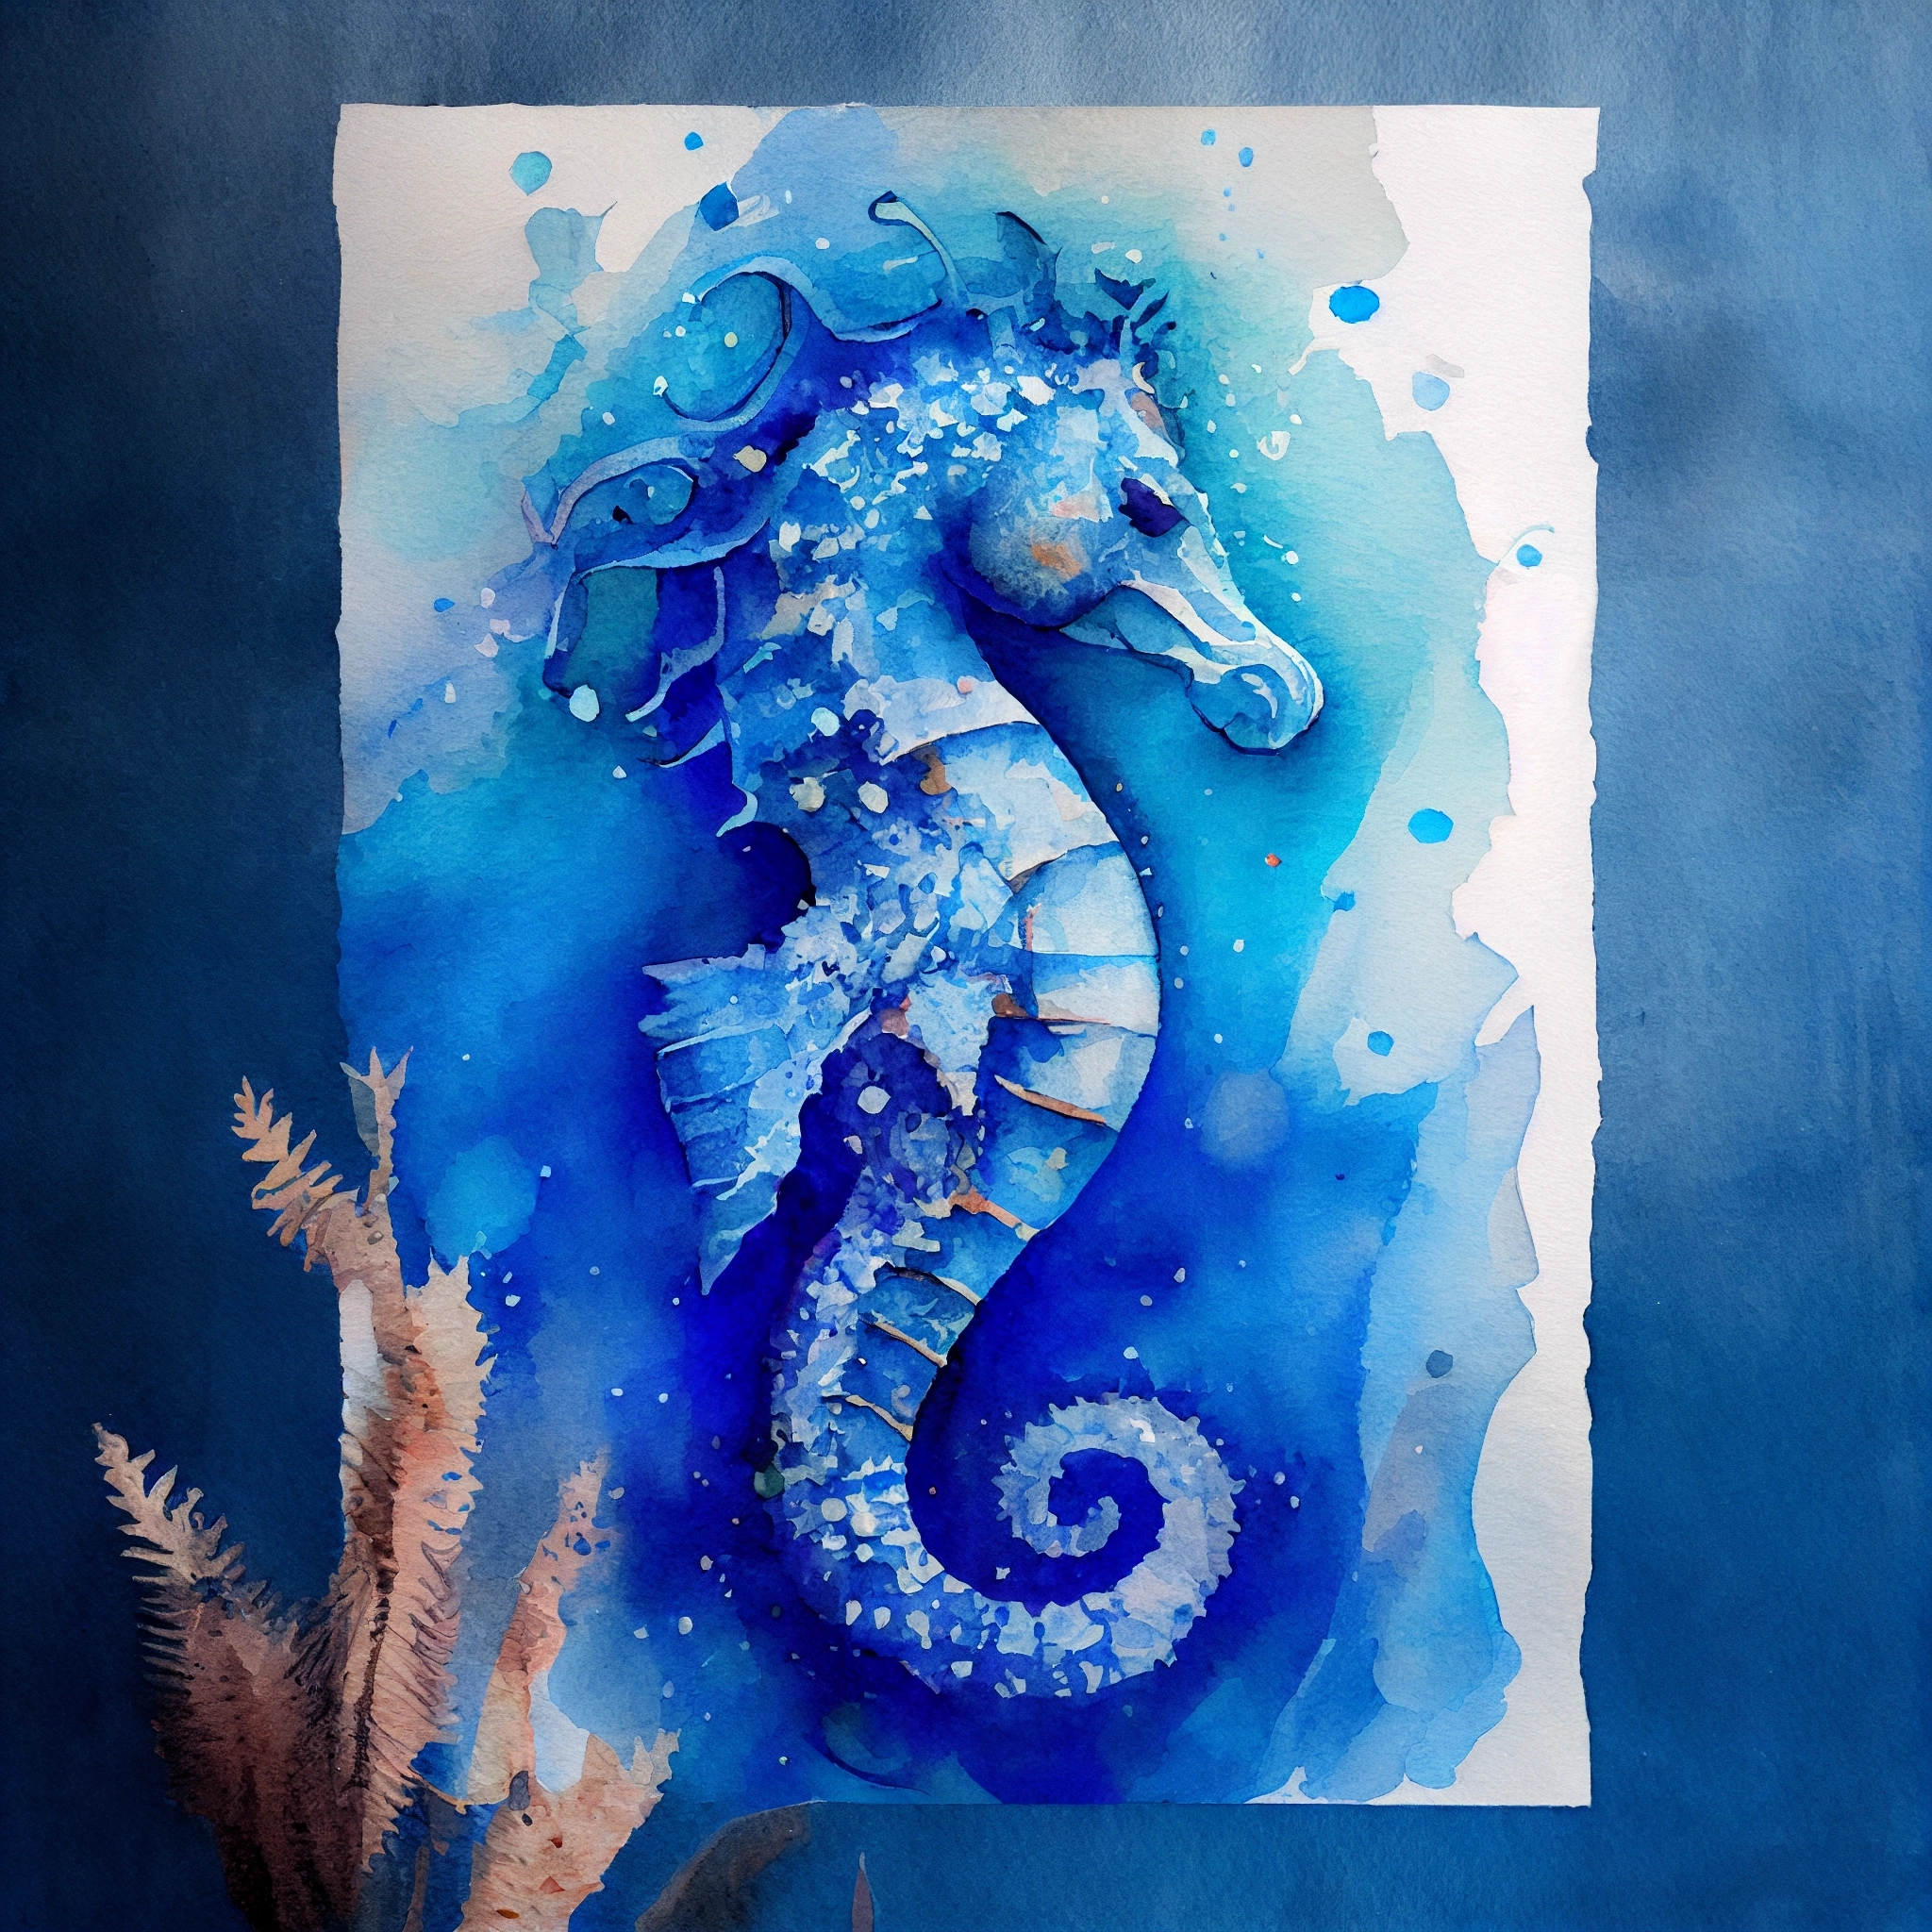 Graceful Beauty: A Vibrant Seahorse in a Blue Abyss